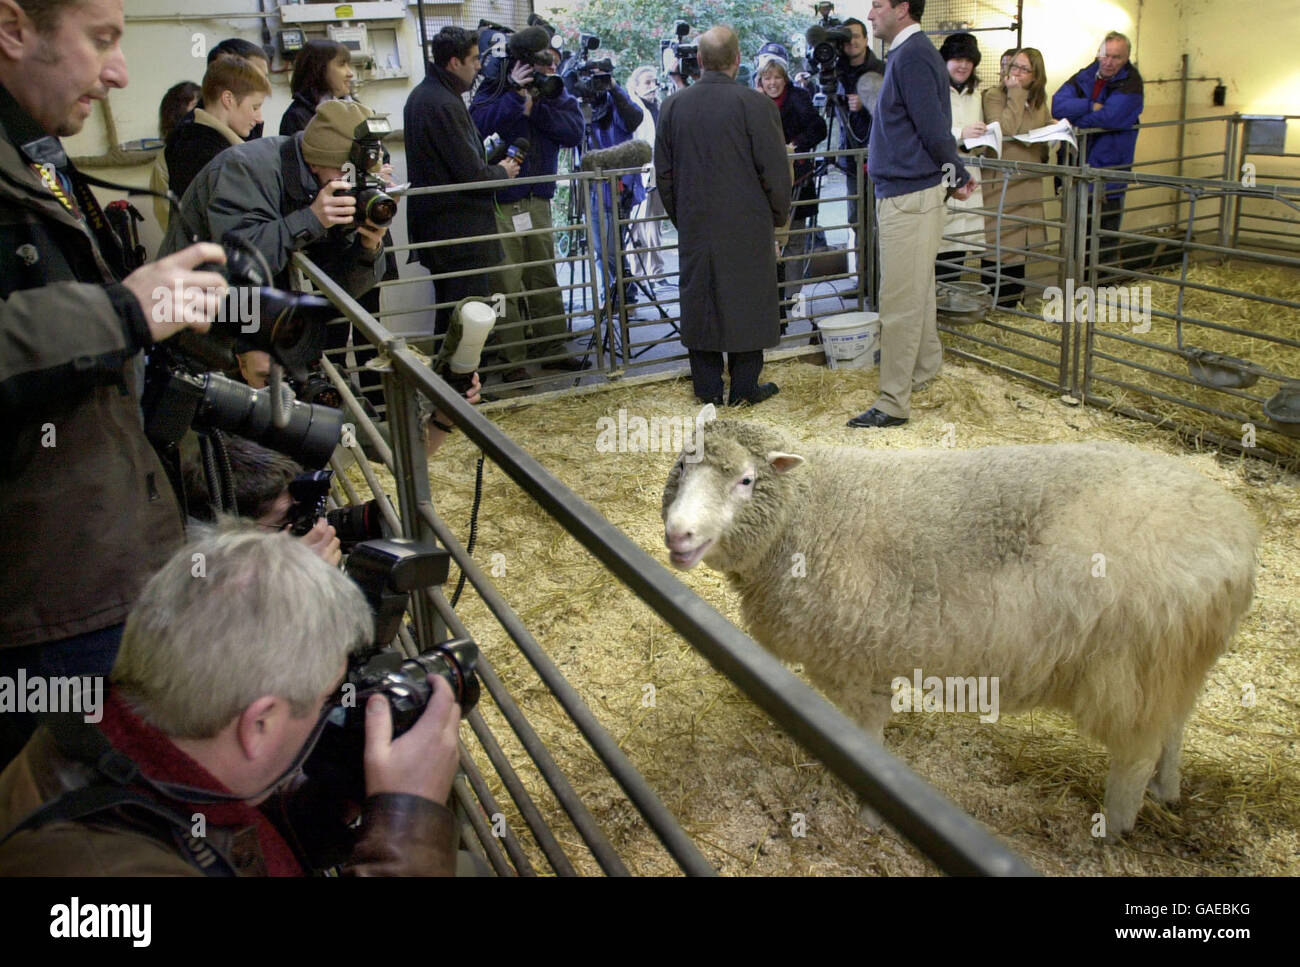 File photo dated 04/01/2002 of Dolly the Sheep, as Professor Ian Wilmut of the Roslin Institute with has said stem cell research might be 20 years behind where it is today if Dolly the Sheep had never been born, according to the scientist whose team created the world's first mammal cloned from an adult cell. Stock Photo